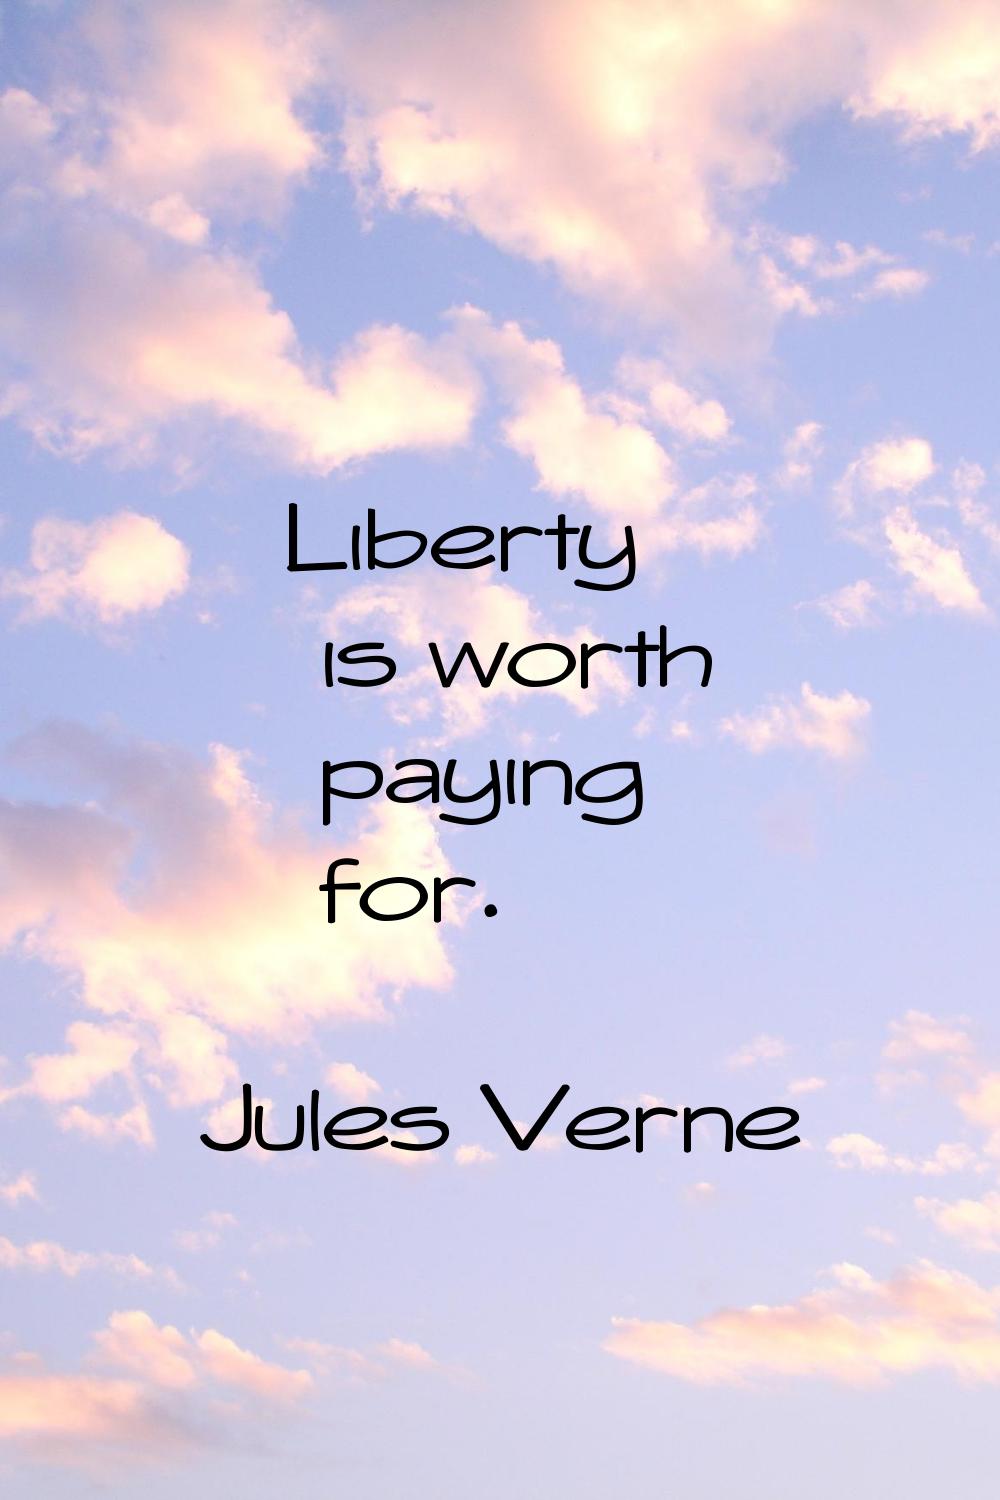 Liberty is worth paying for.